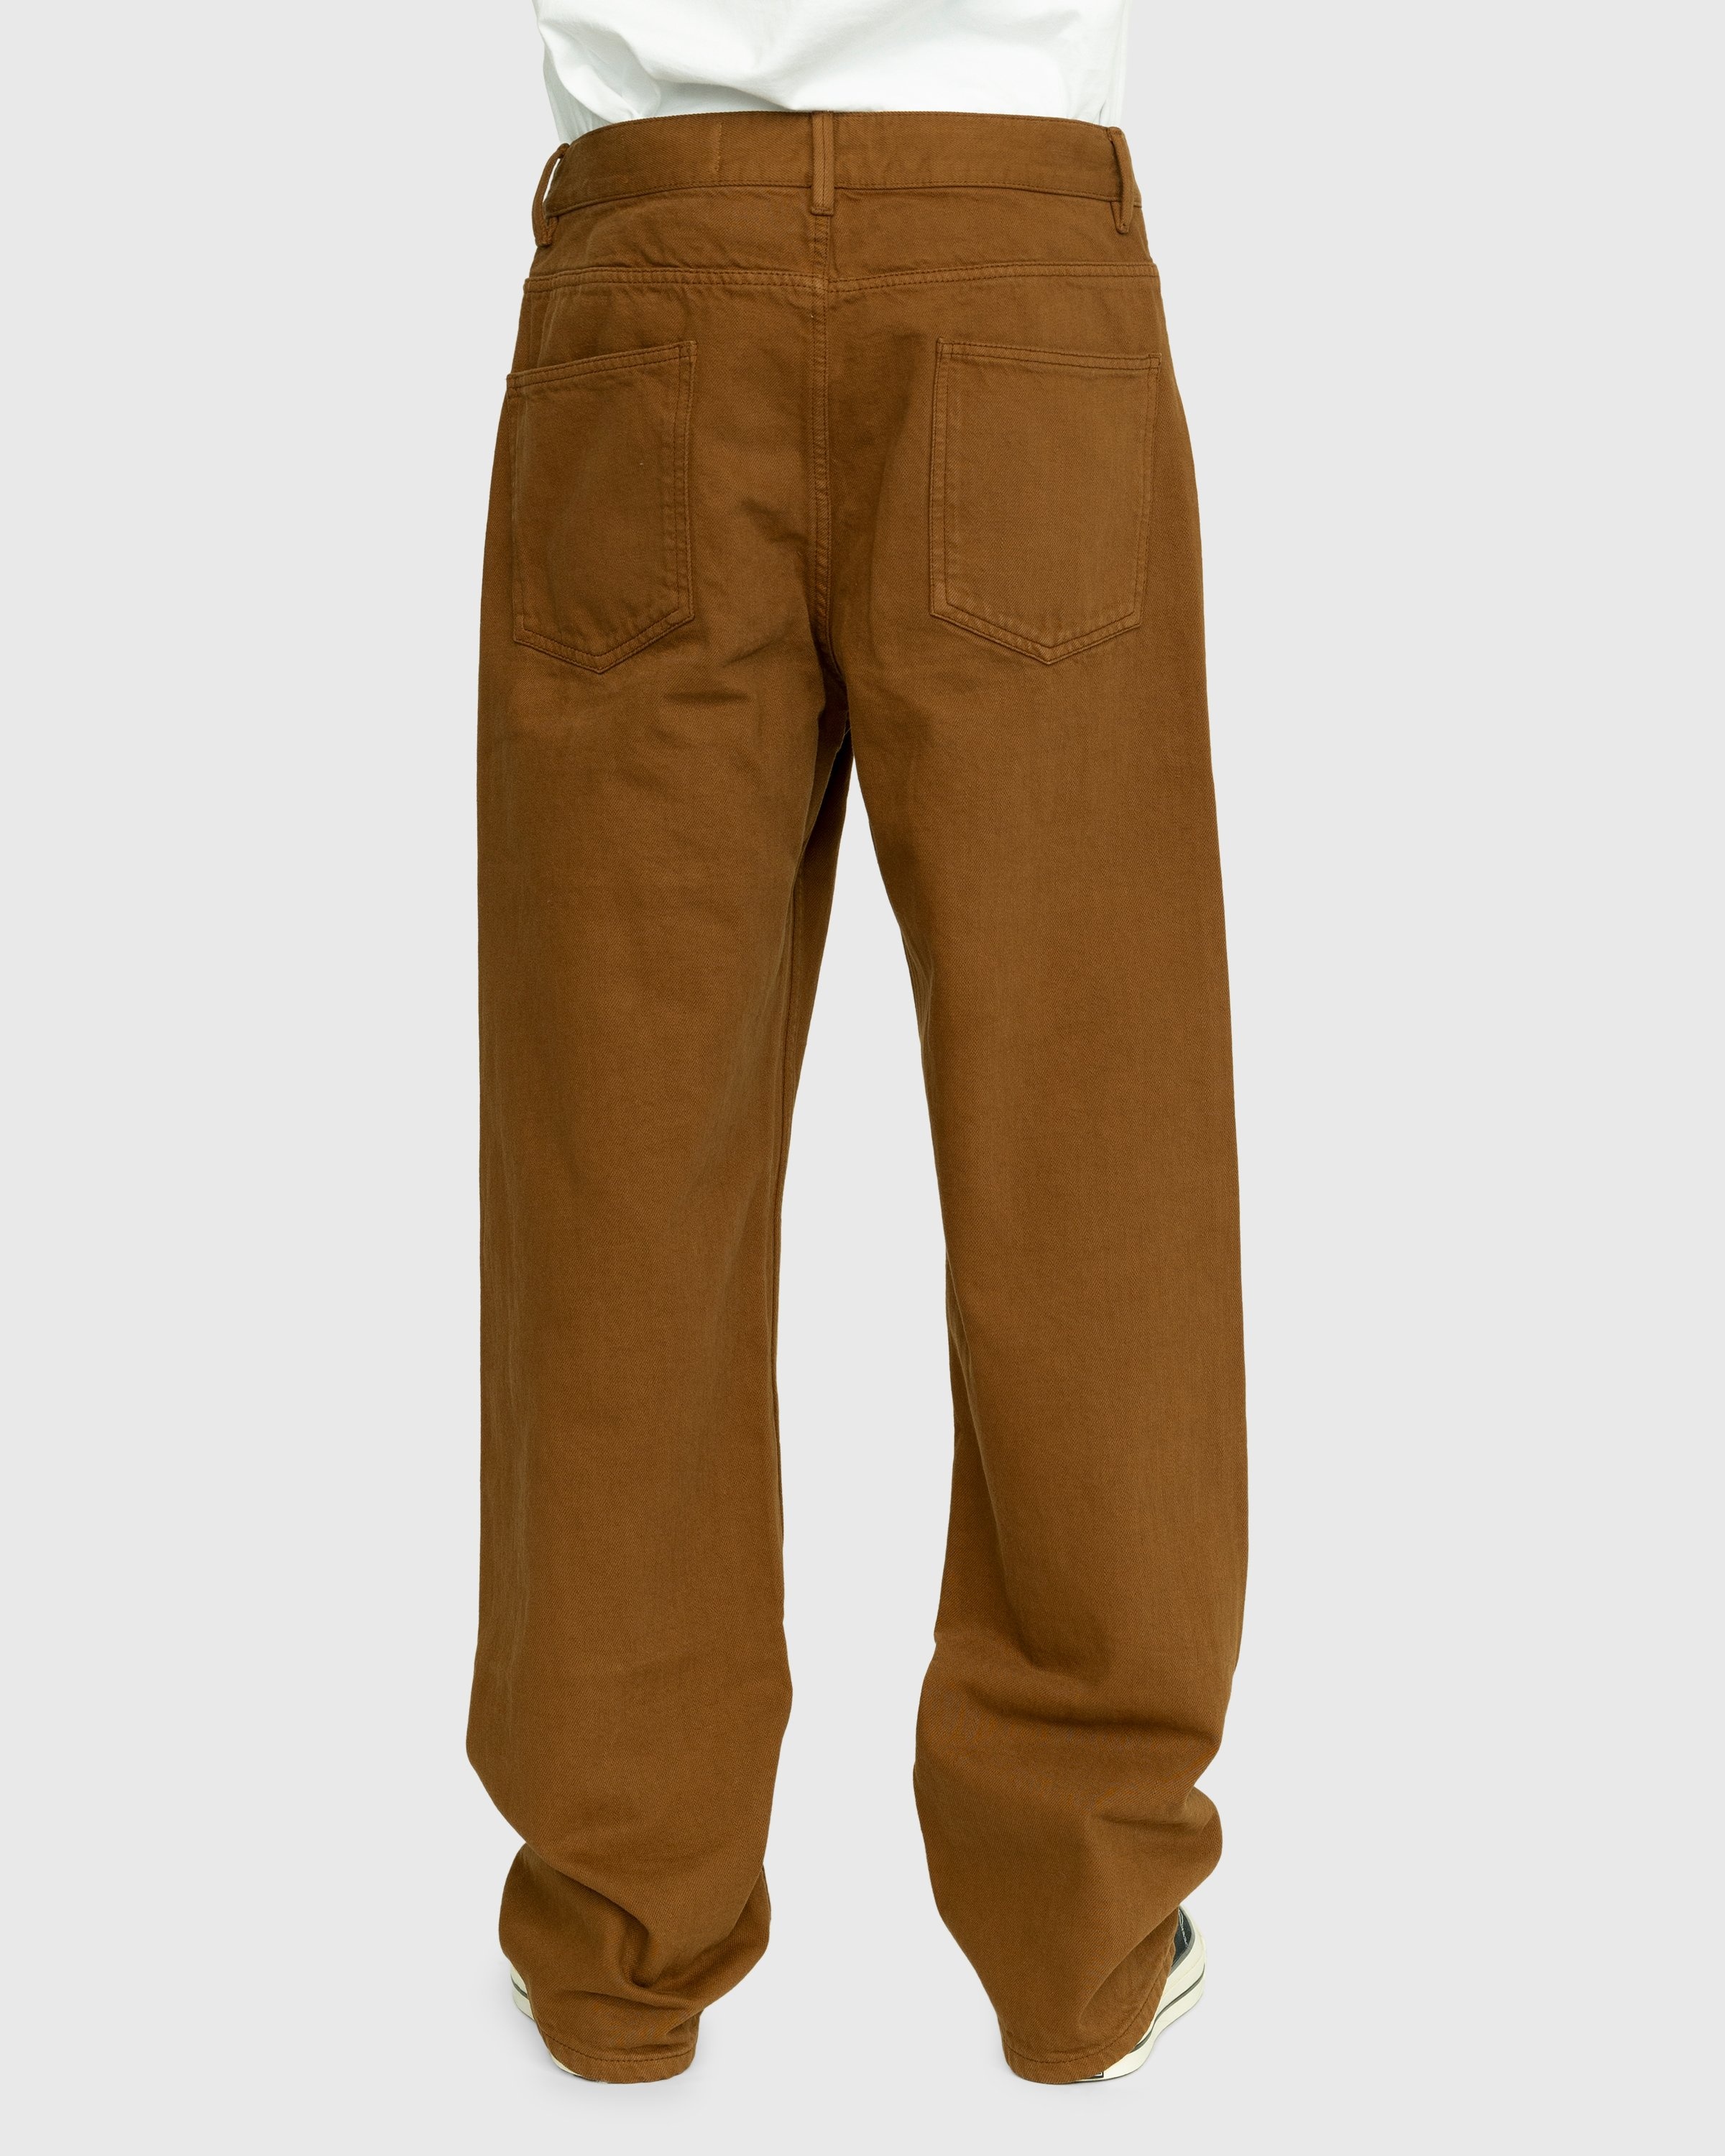 Lemaire – Seamless Jeans Brown - Denim - Brown - Image 4